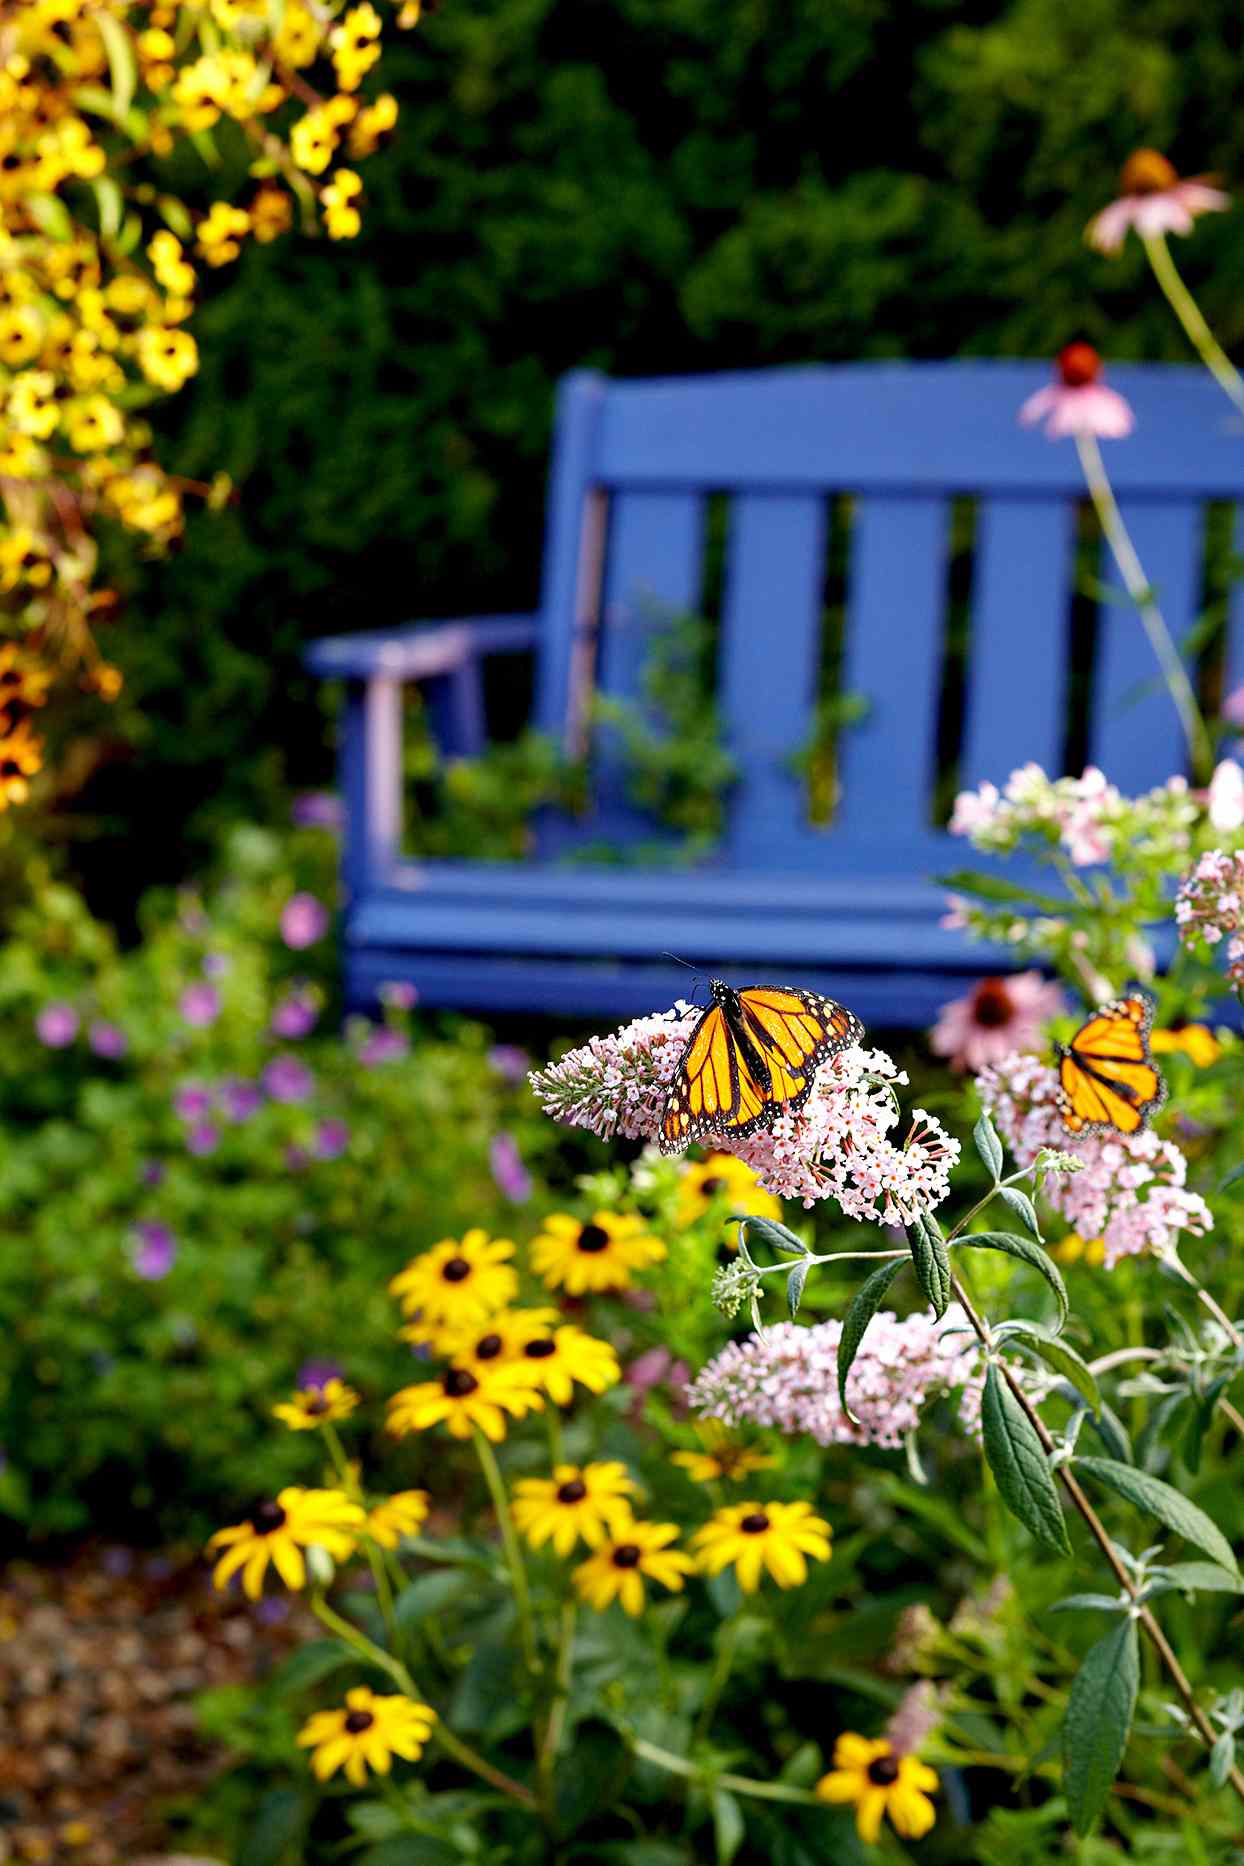 Monarch butterfly among flowers and blue bench